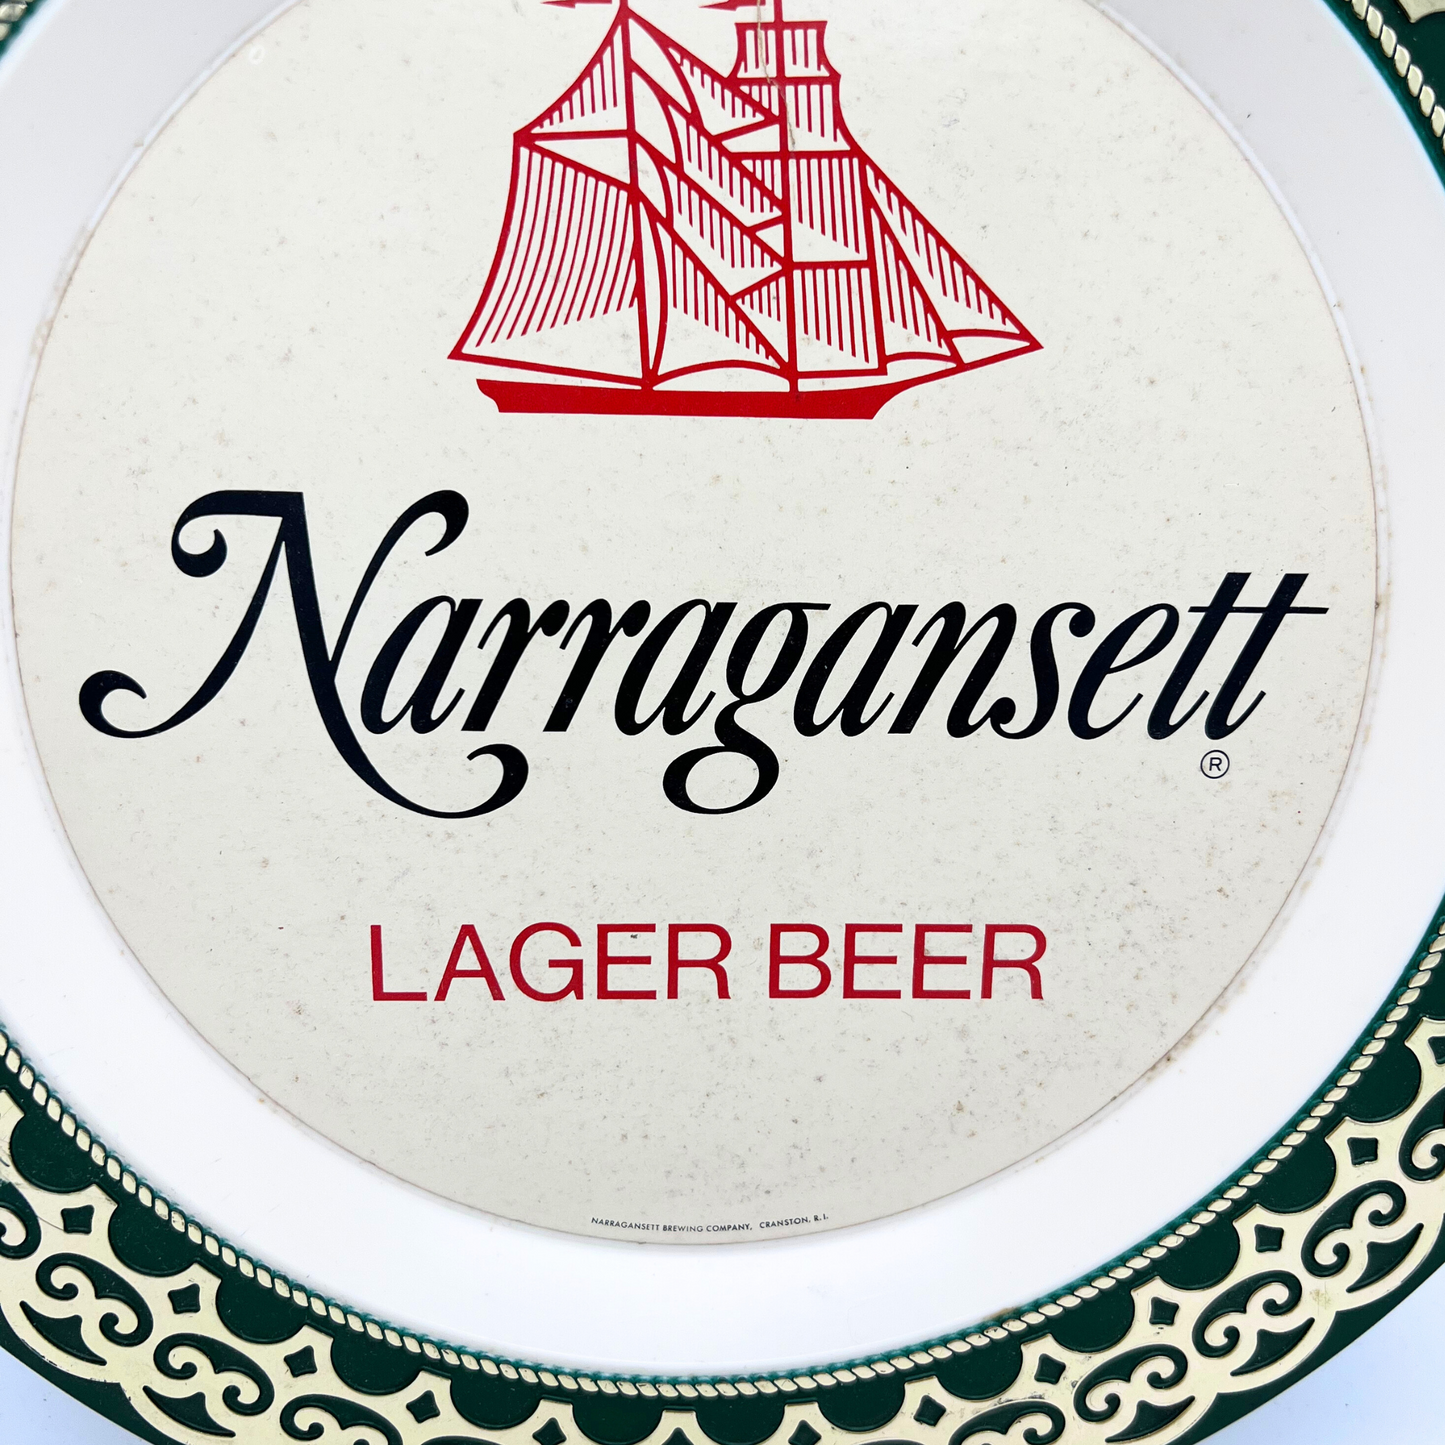 collectible vintage Narragansett beer tray